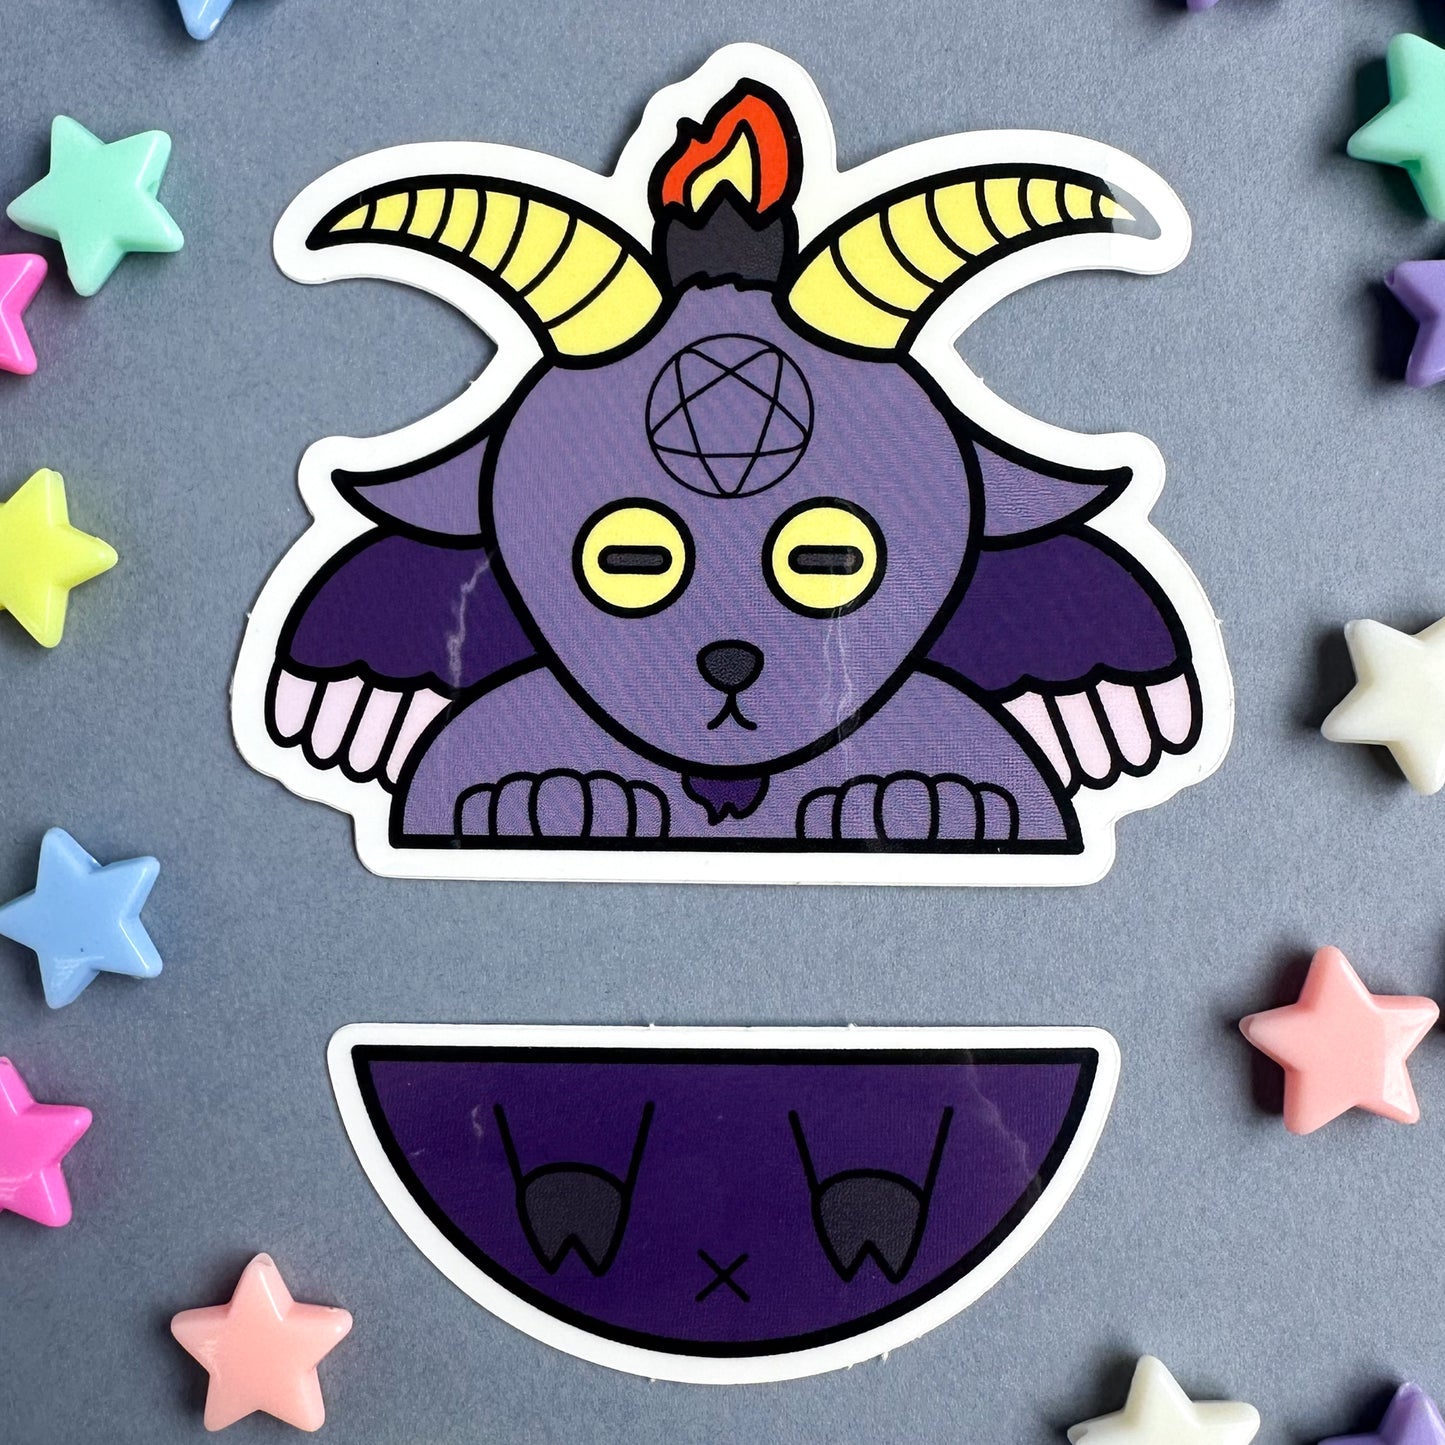 Two stickers that come together to form a cute illustration of Baphomet. The stickers are sitting on a grey background with pastel star beads around it.